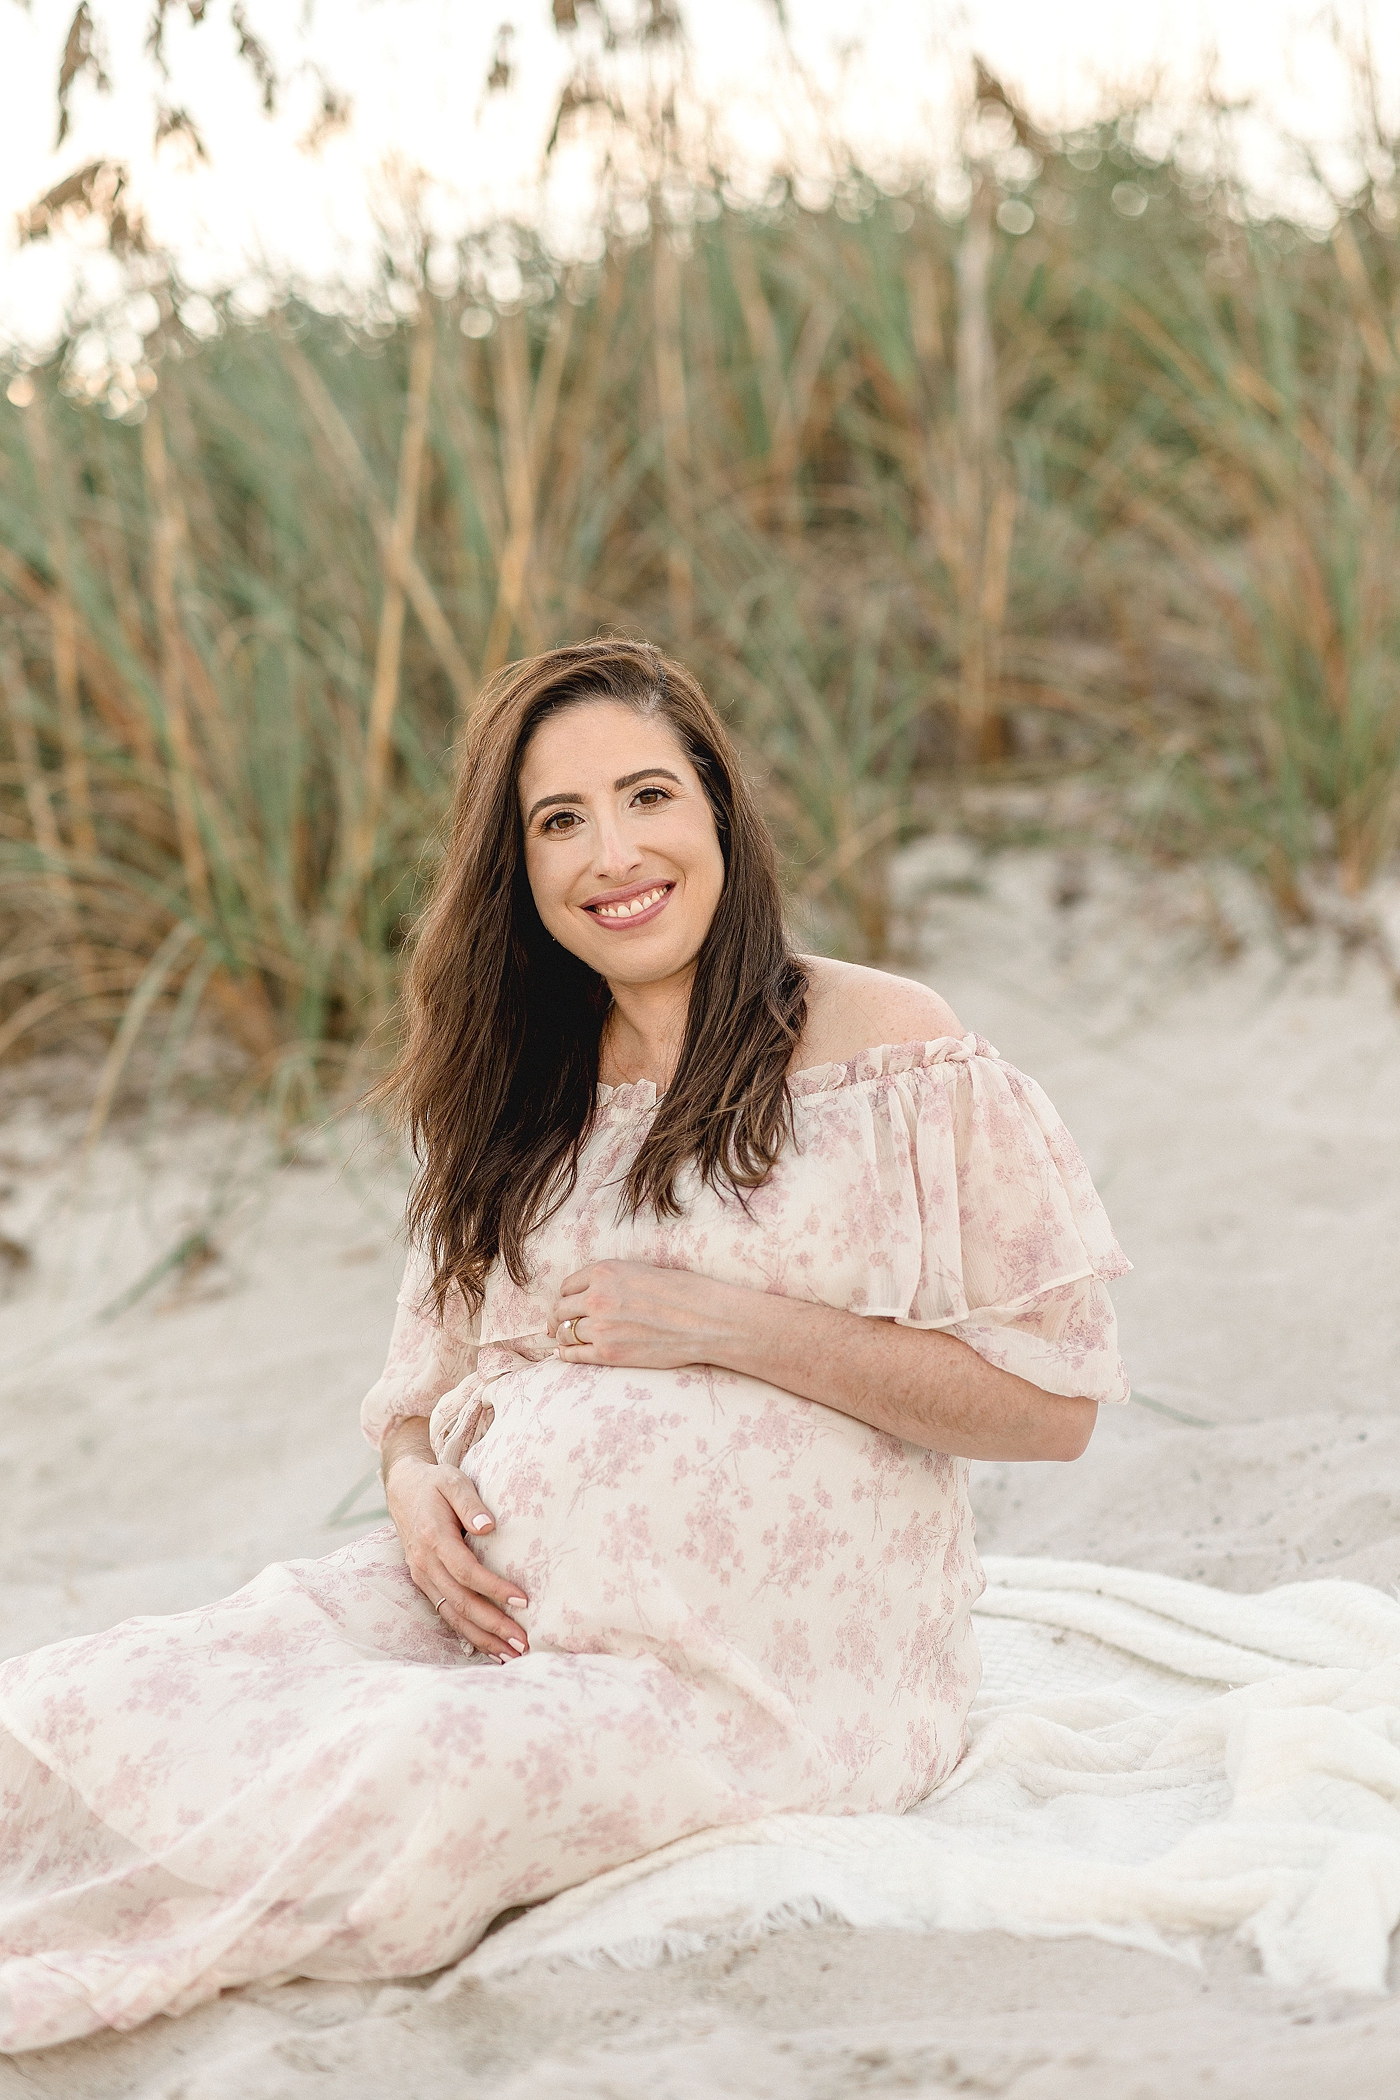 Mom to be sits atop blanket during maternity session at El Farito Beach Miami FL. Photo by Ivanna Vidal Photography.